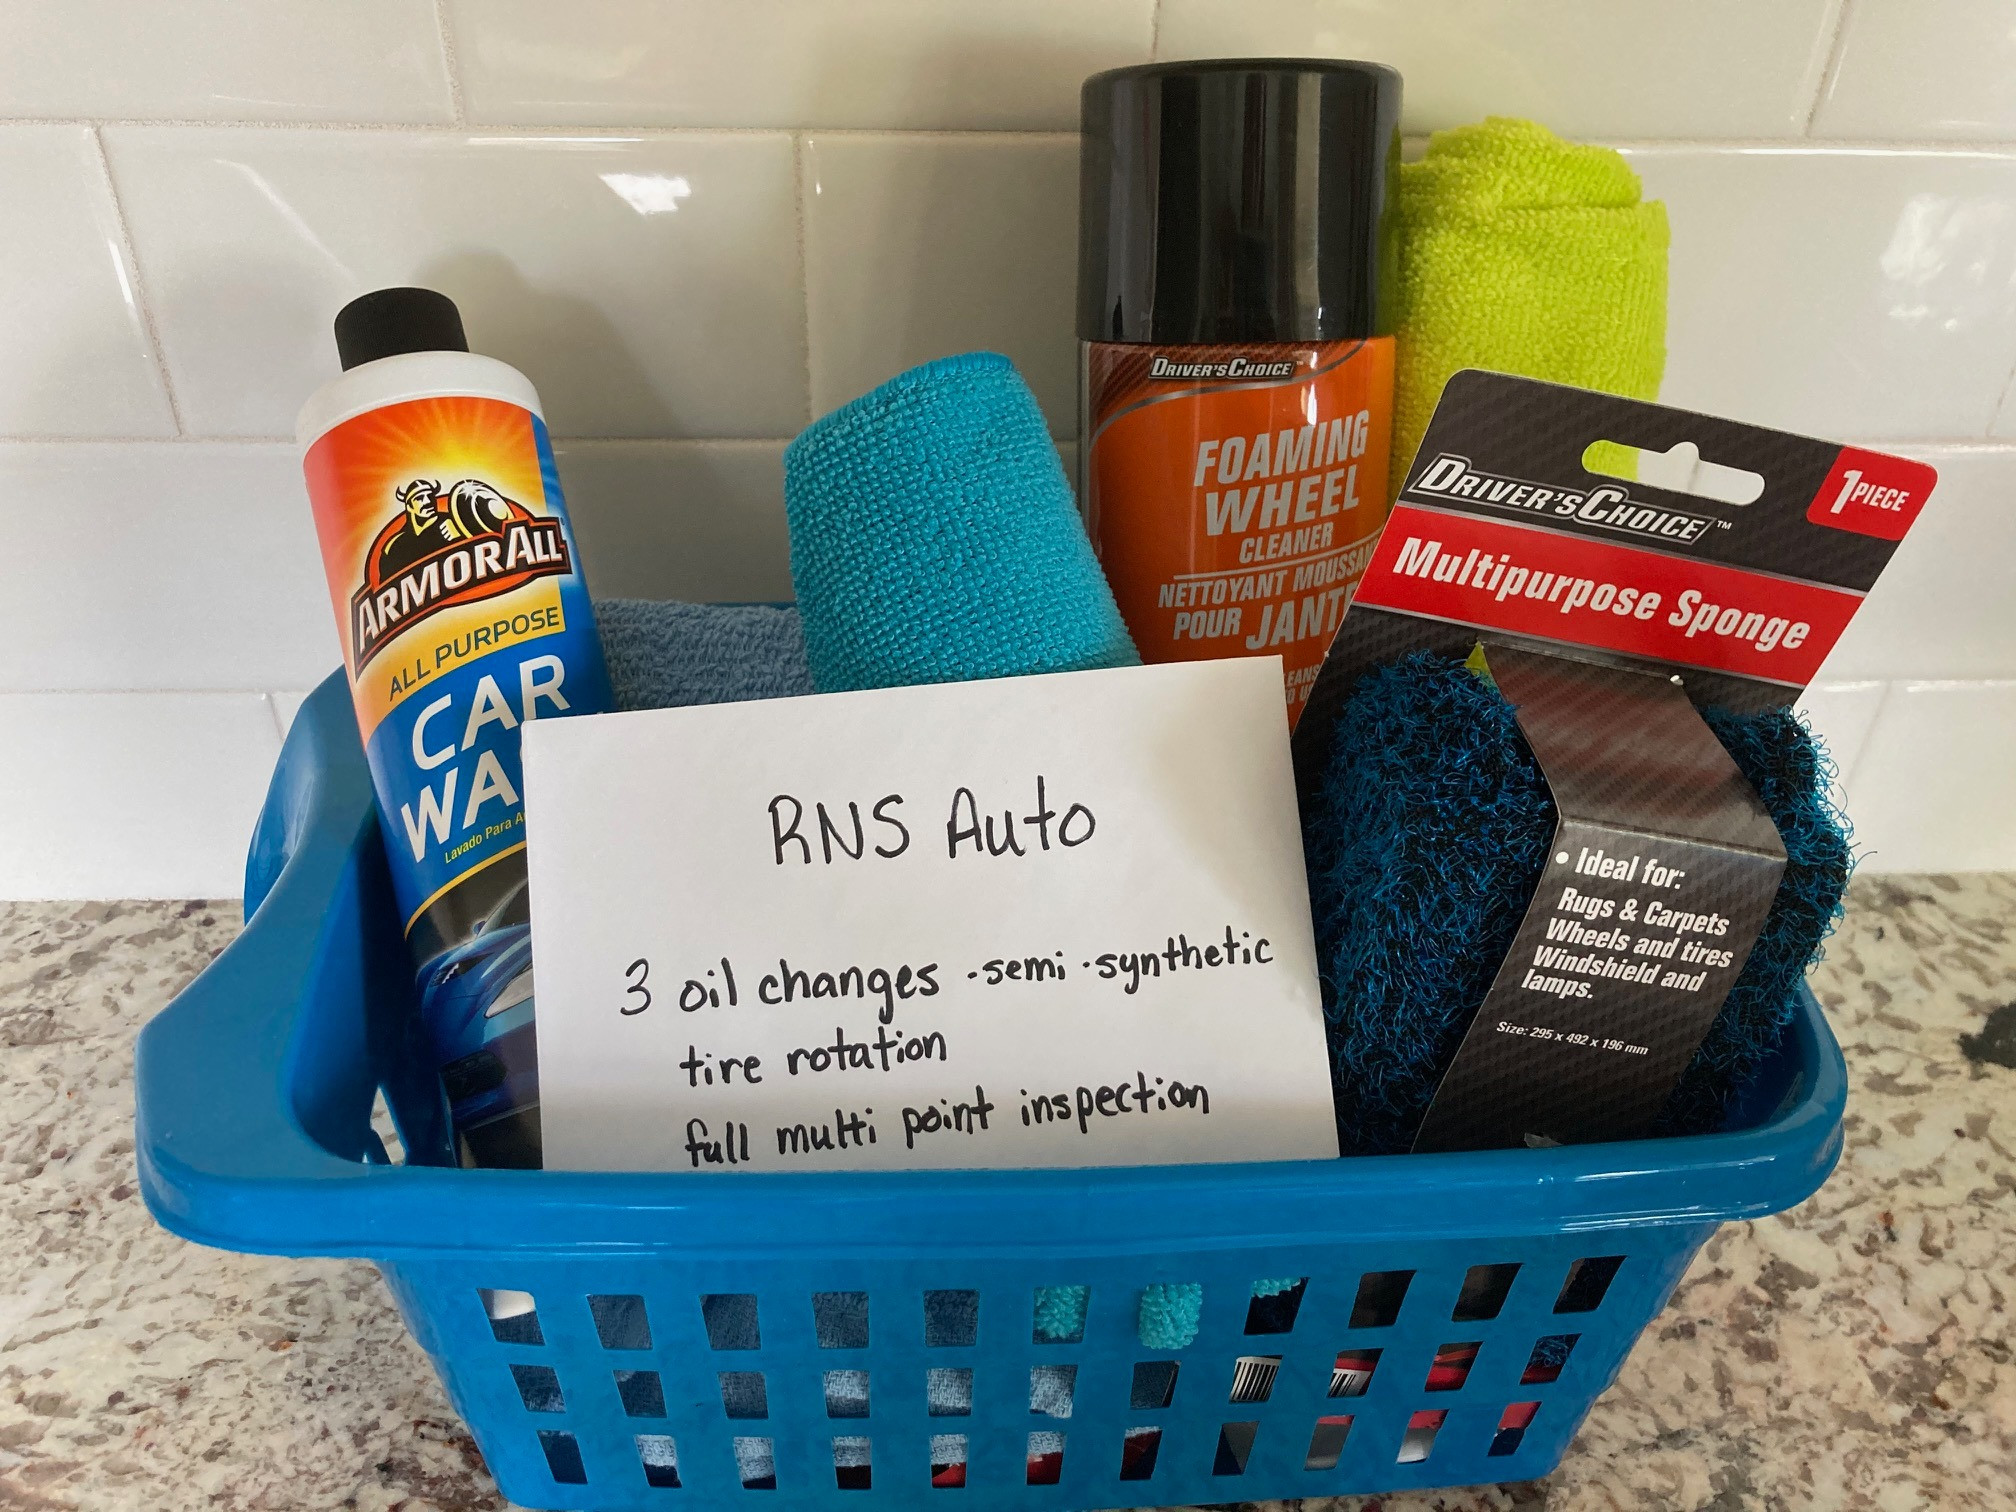 3 oil changes (semi-synthetic), tire rotations, and full multi-point inspections. 2 microfiber cleaning cloths, multipurpose sponge for wheels, tires, or windshields, one small towel, car wash, foaming wheel cleaner.    visit rnsautoservices.com